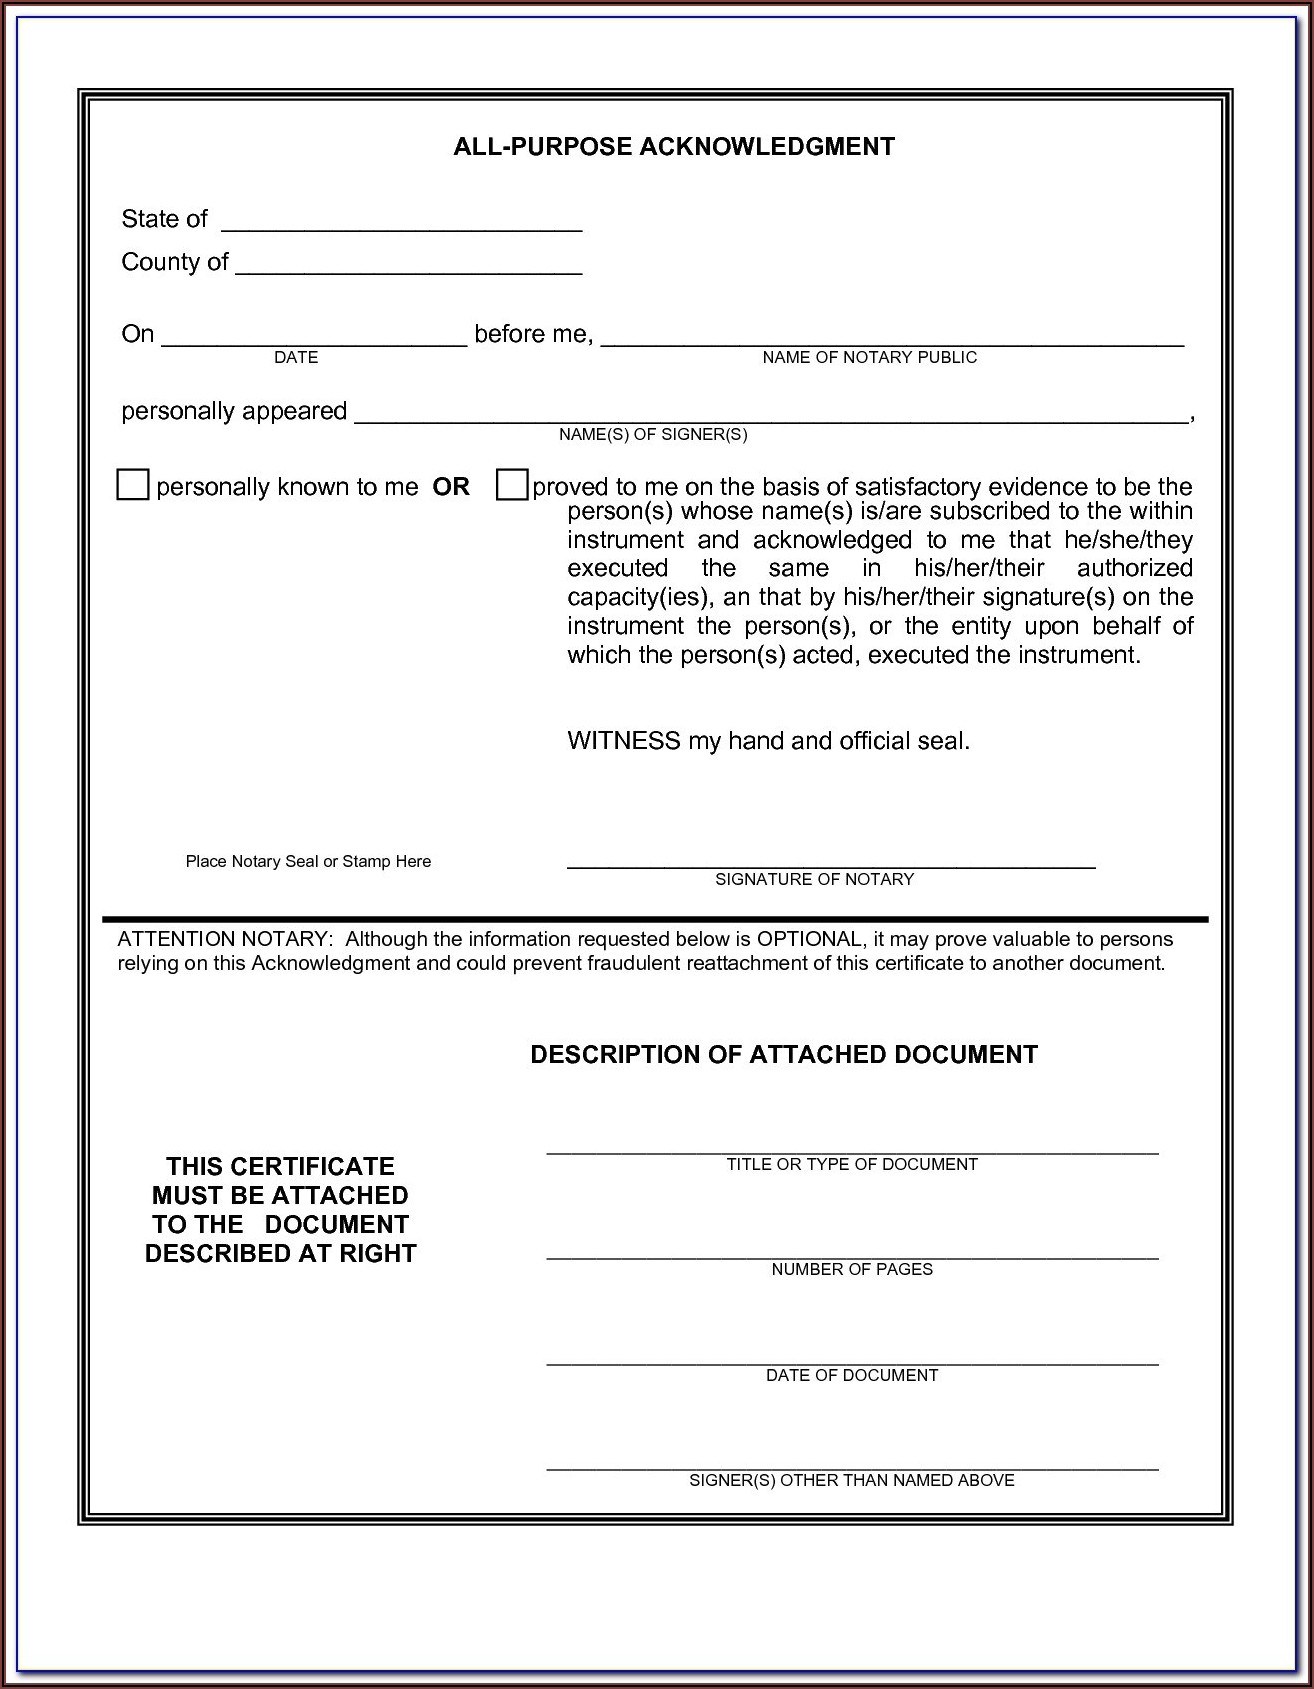 Sample Notary Forms Florida